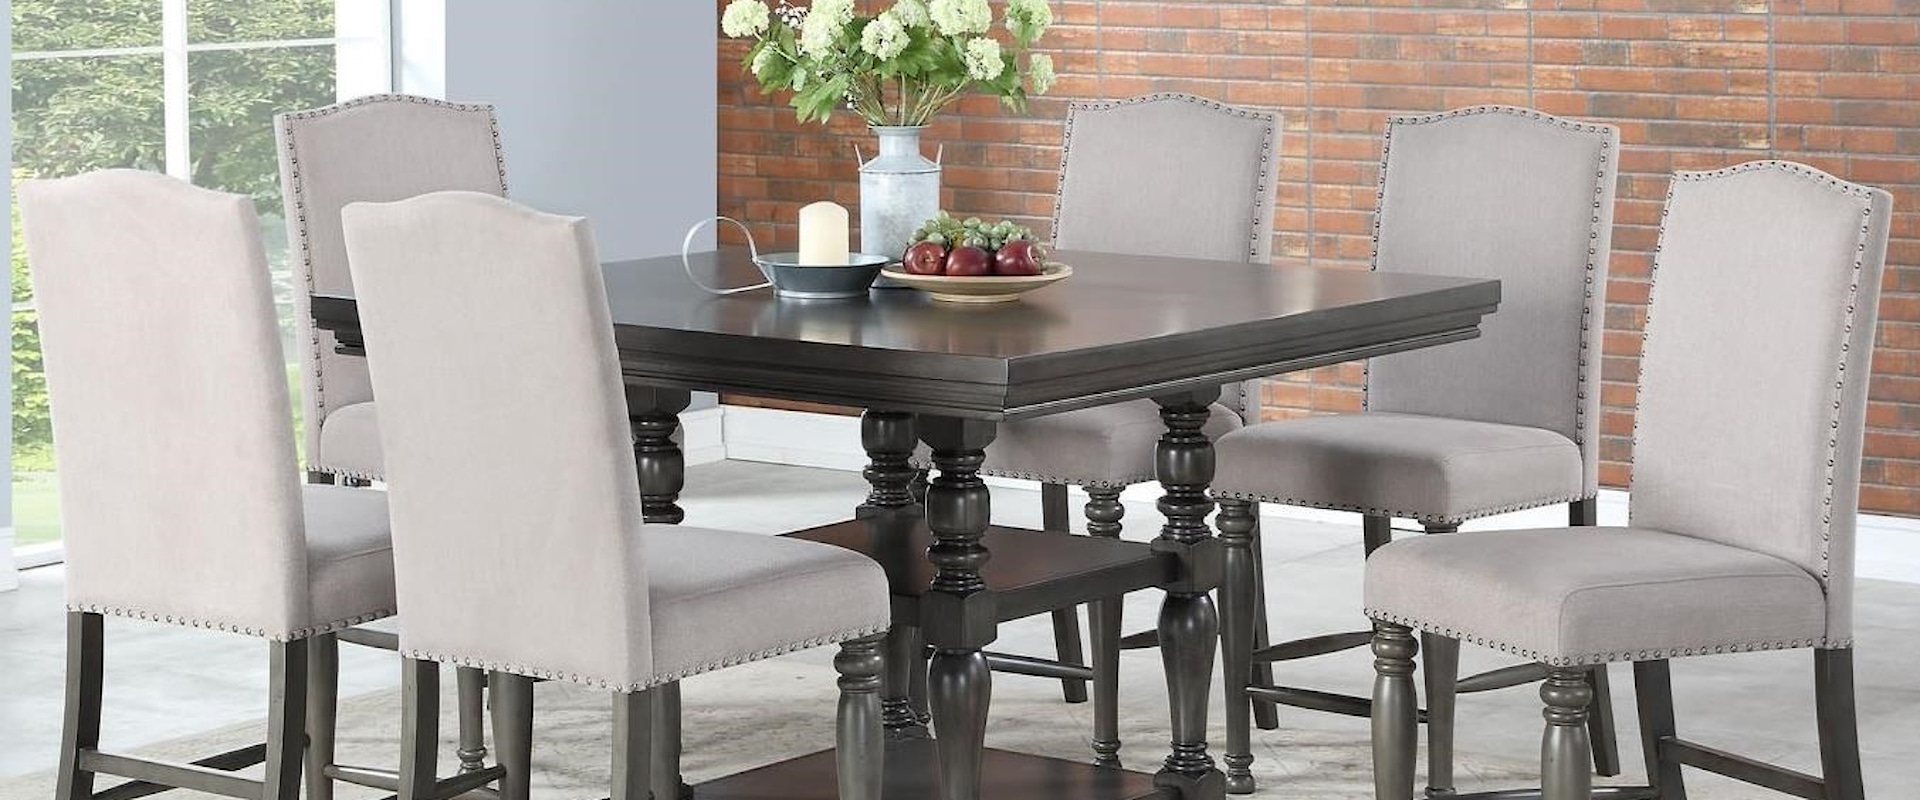 Seven Piece Traditional Counter Height Dining Set with Bench